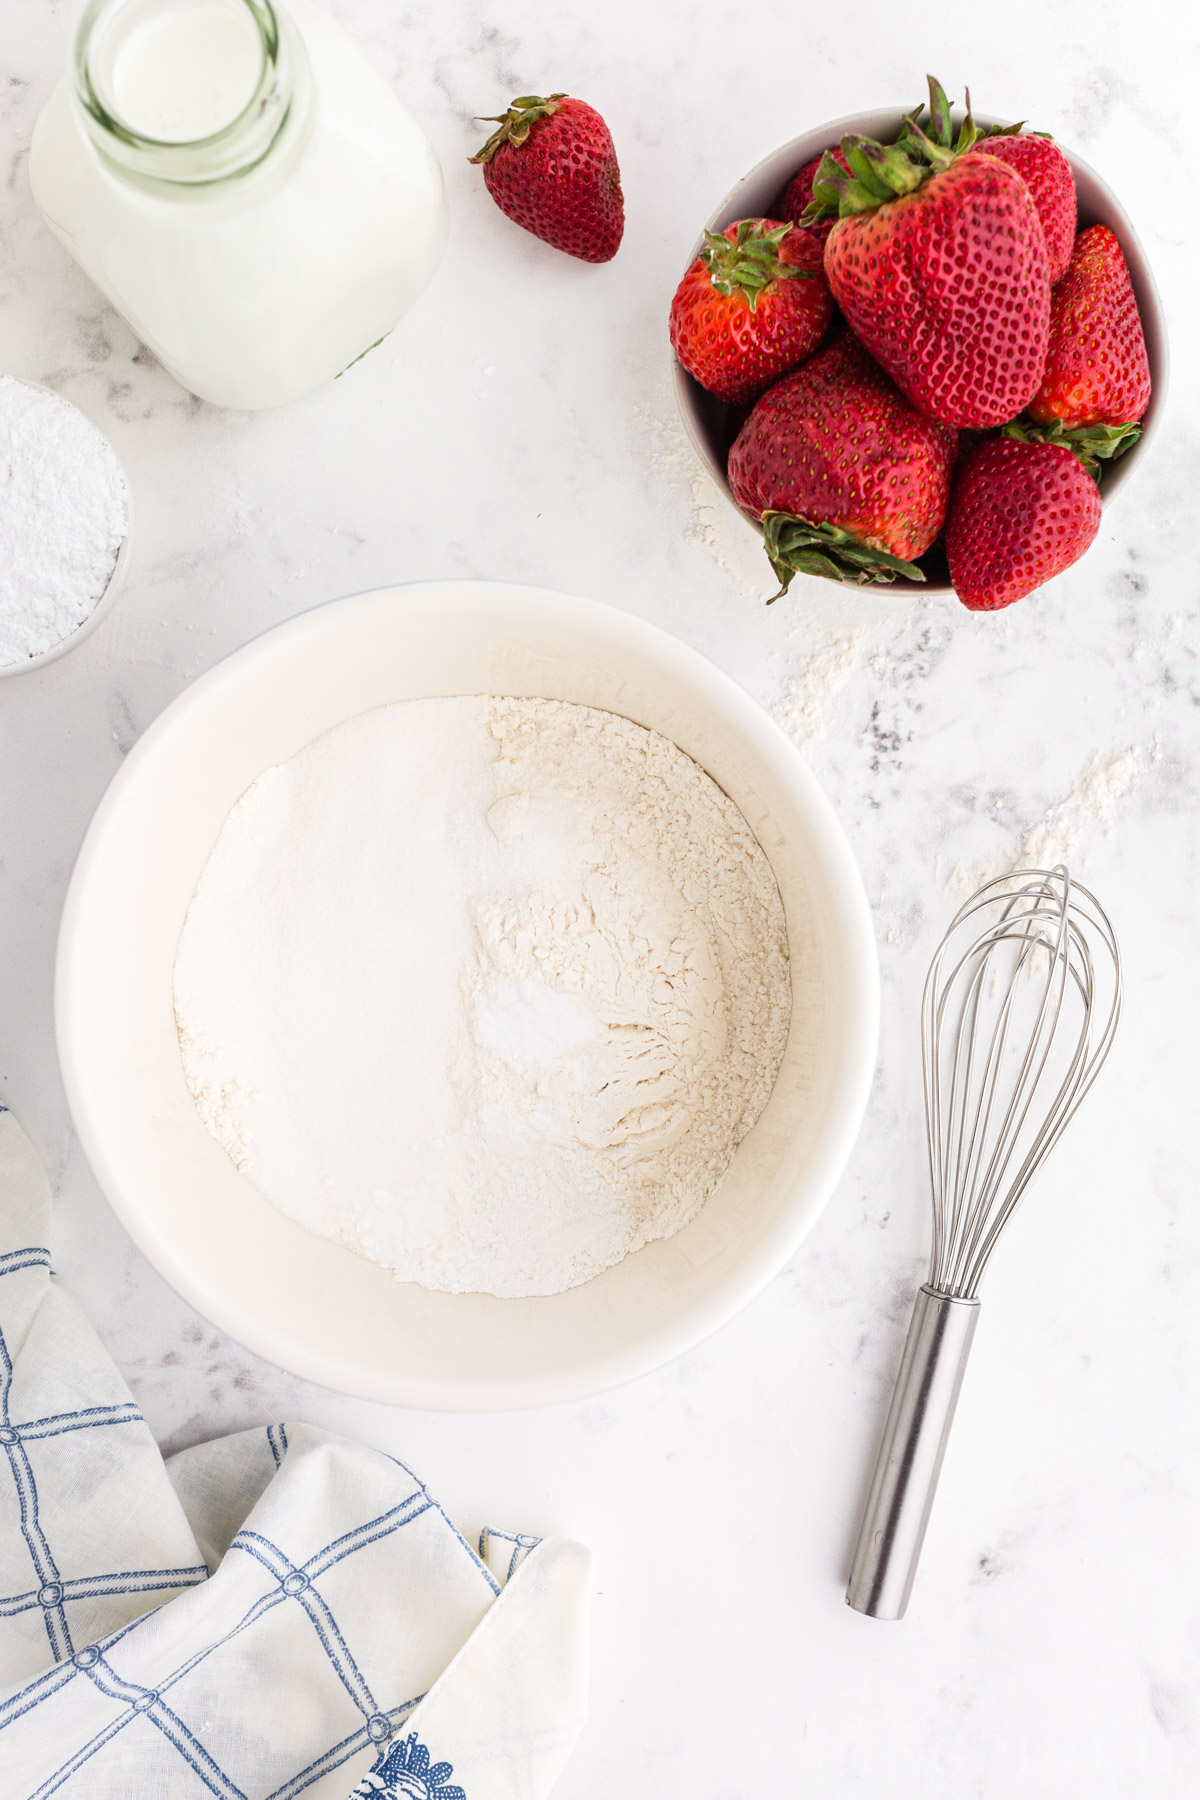 Dry ingredients in mixing bowl with jug of milk and bowl of strawberries.